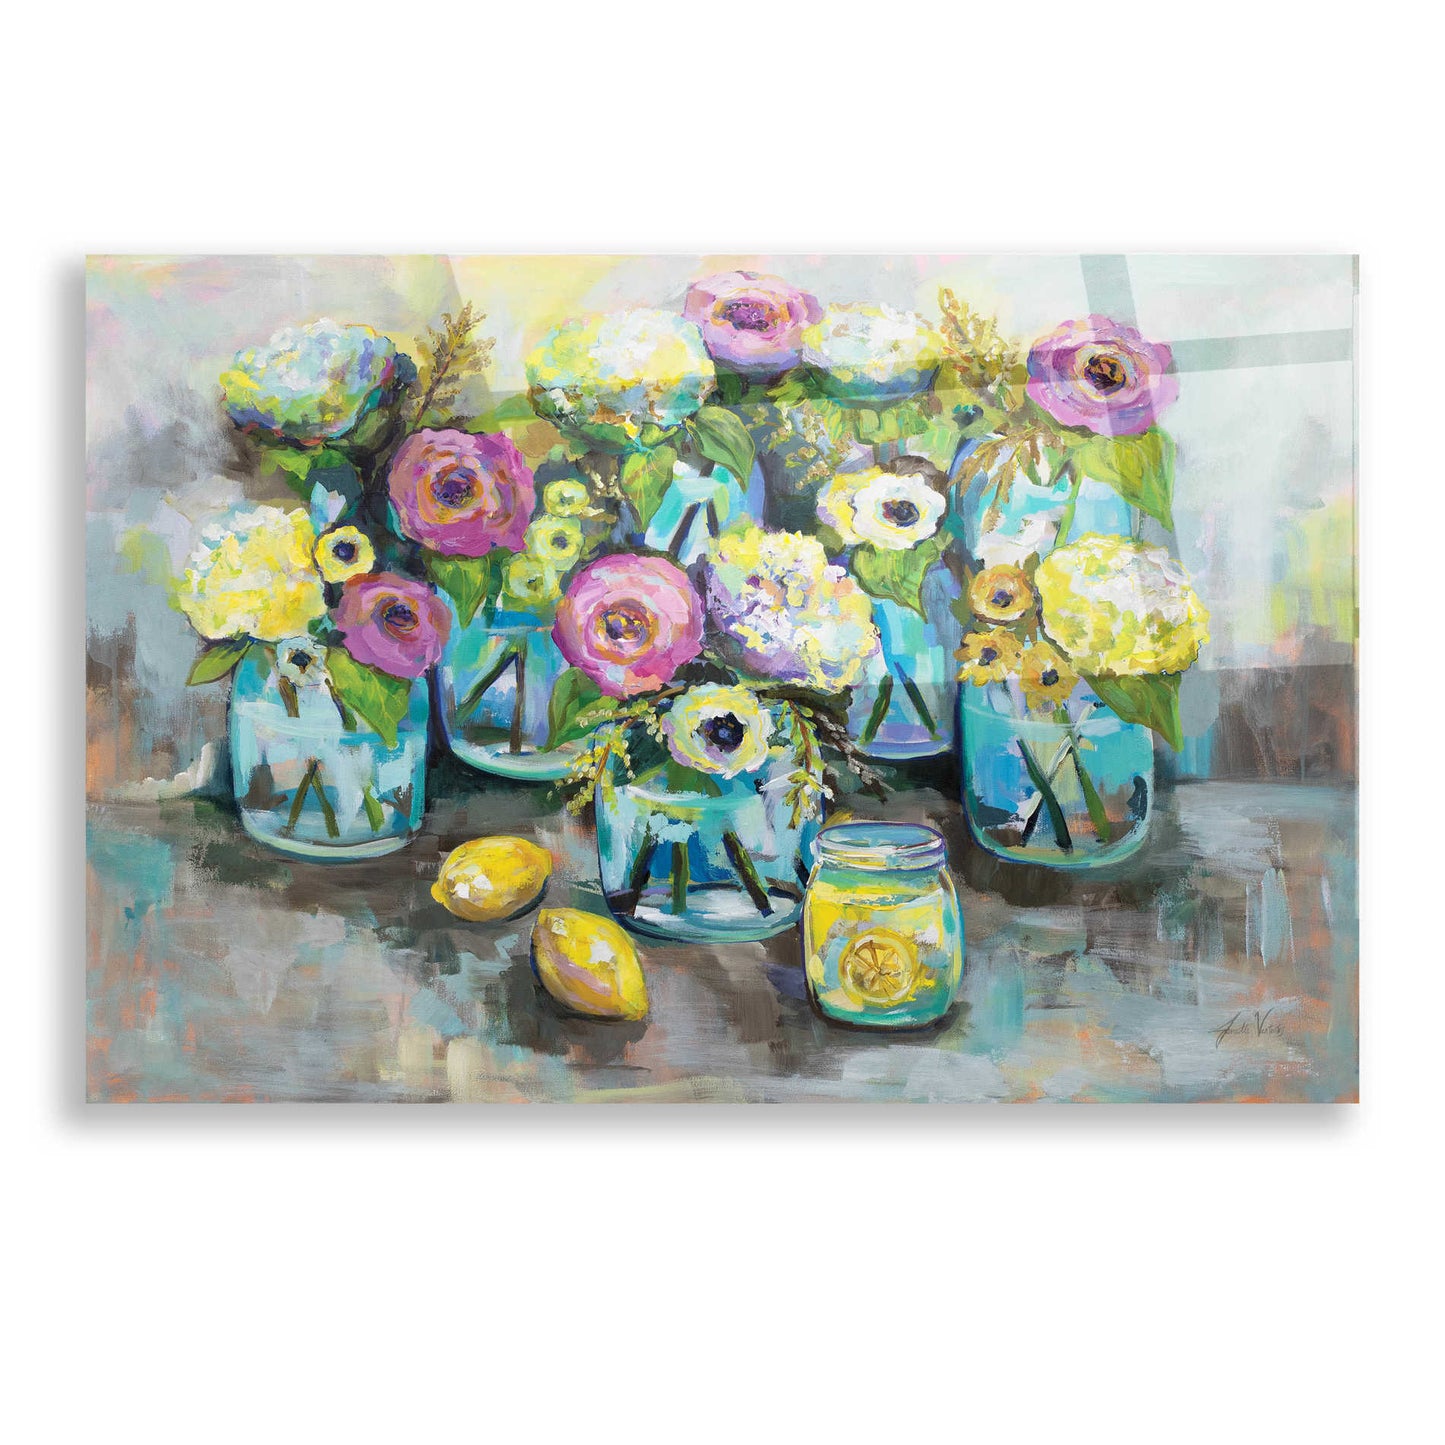 Epic Art 'When Life Gives You Lemons' by Jeanette Vertentes, Acrylic Glass Wall Art